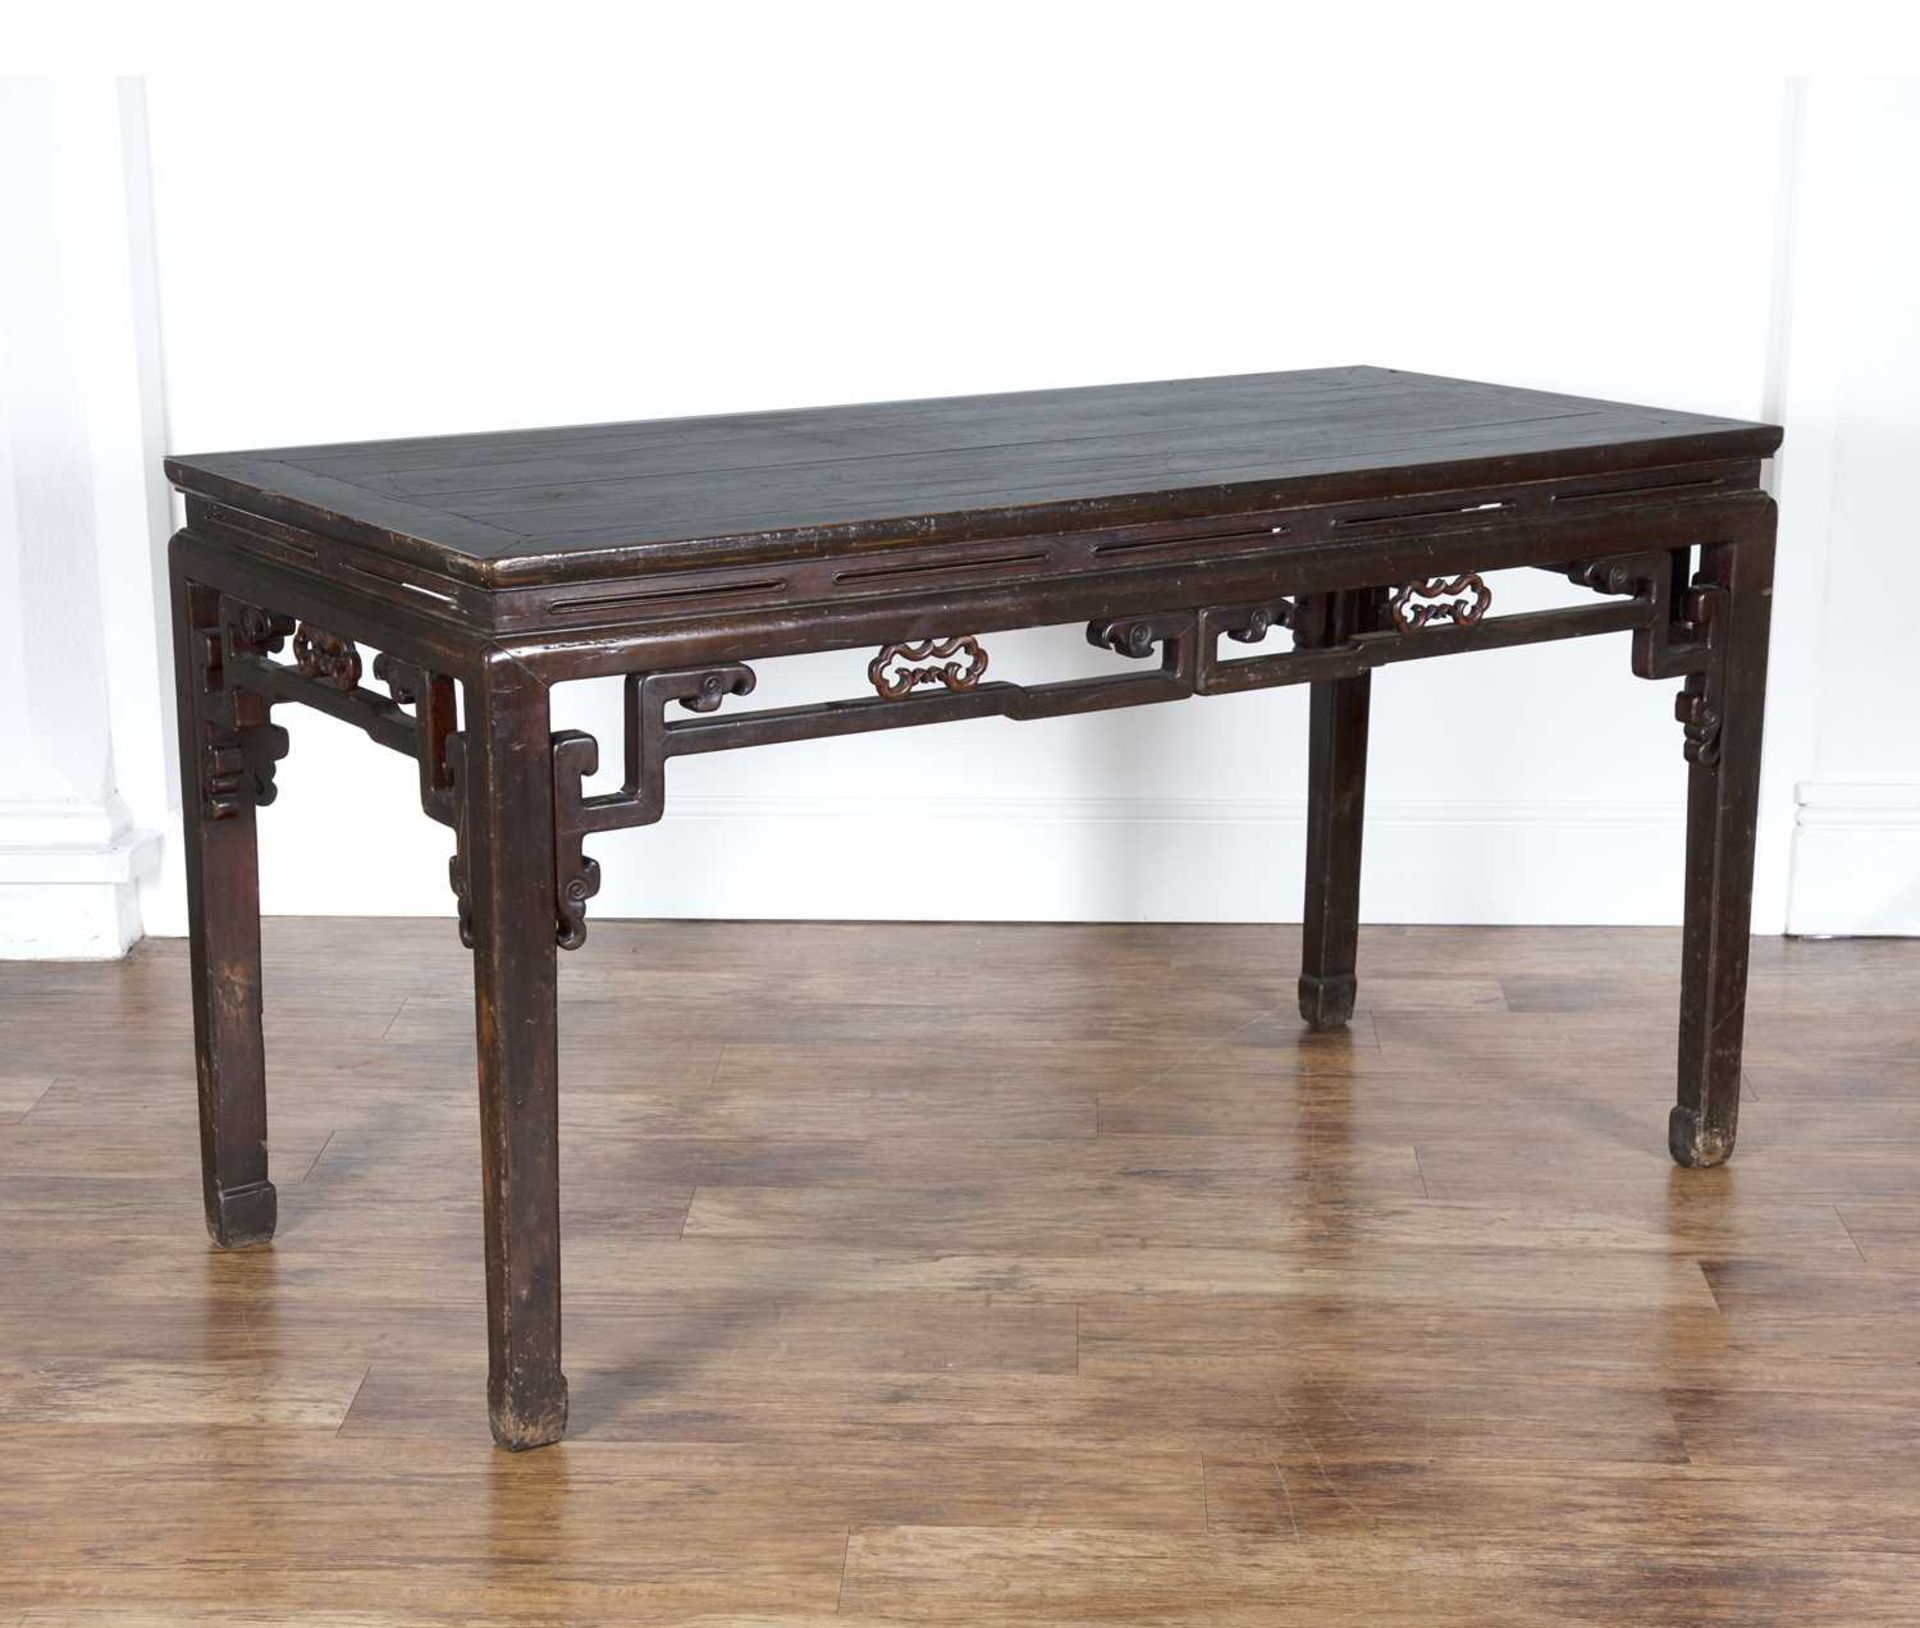 Stained hardwood altar table Chinese, early 20th Century carved in the Ming style with ruyi to the - Image 2 of 4